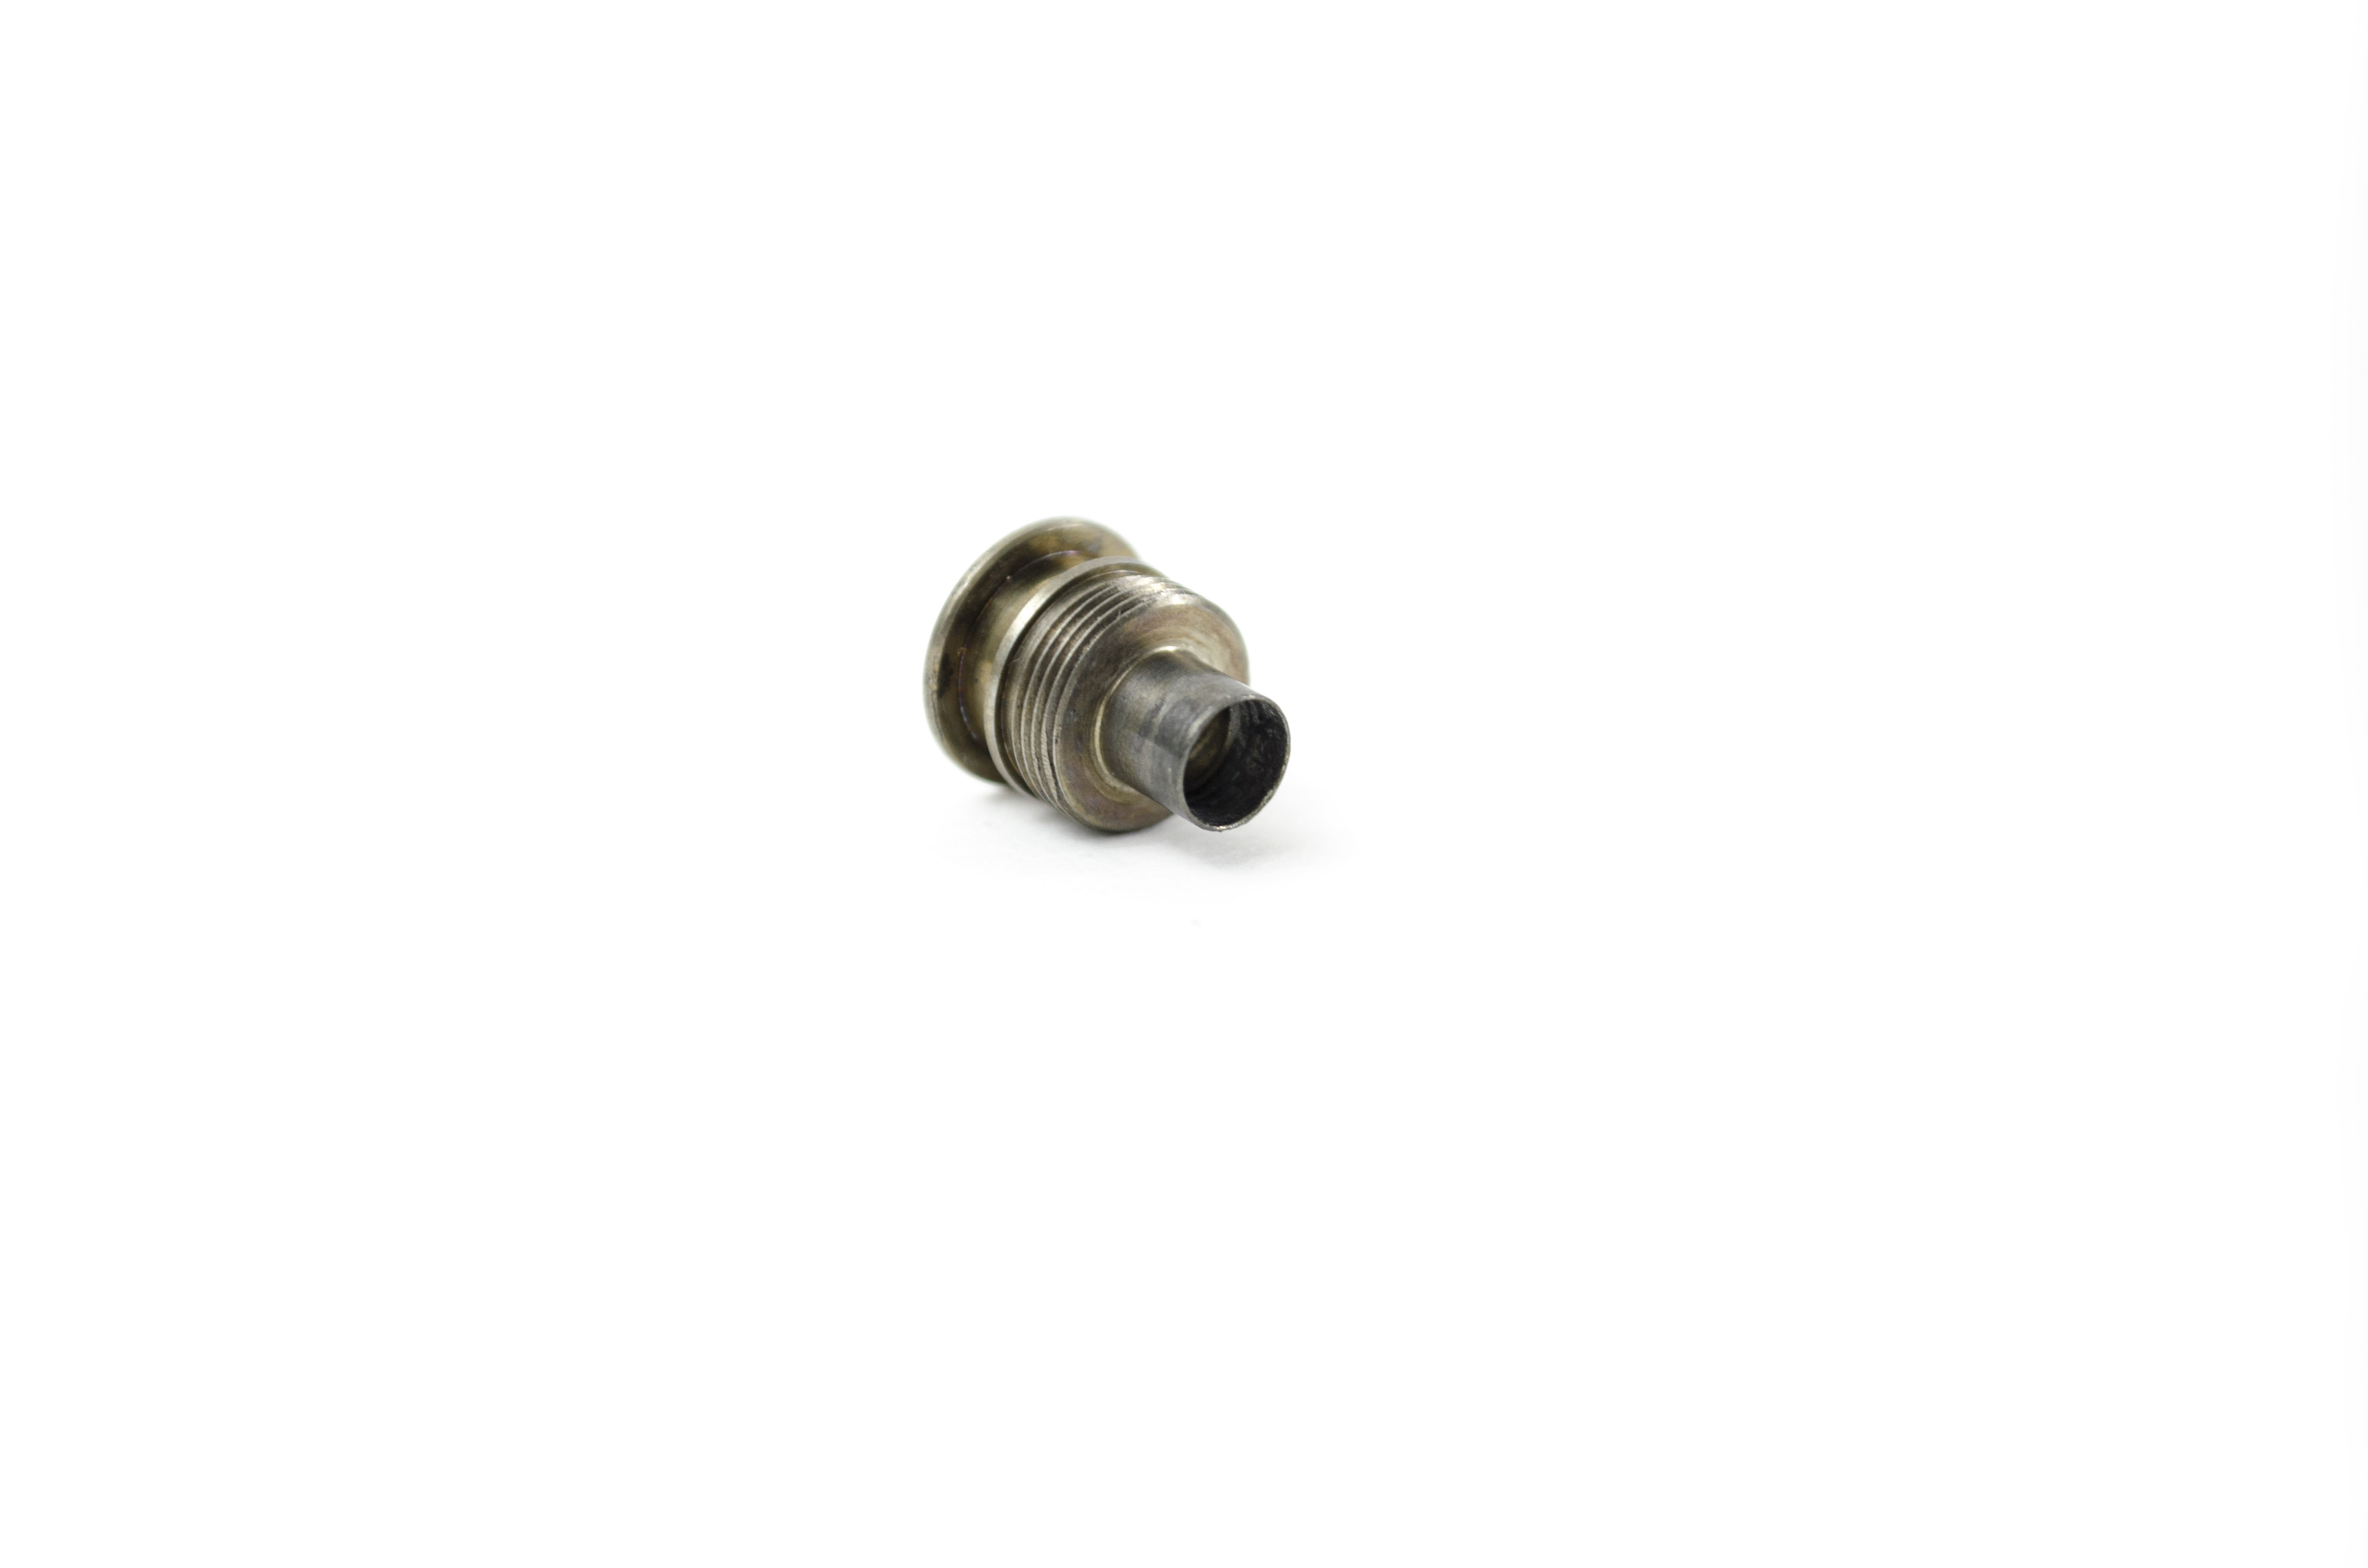 OEM Insertion Tube Proximal End Fitting - BF-3C30, BF-3C40